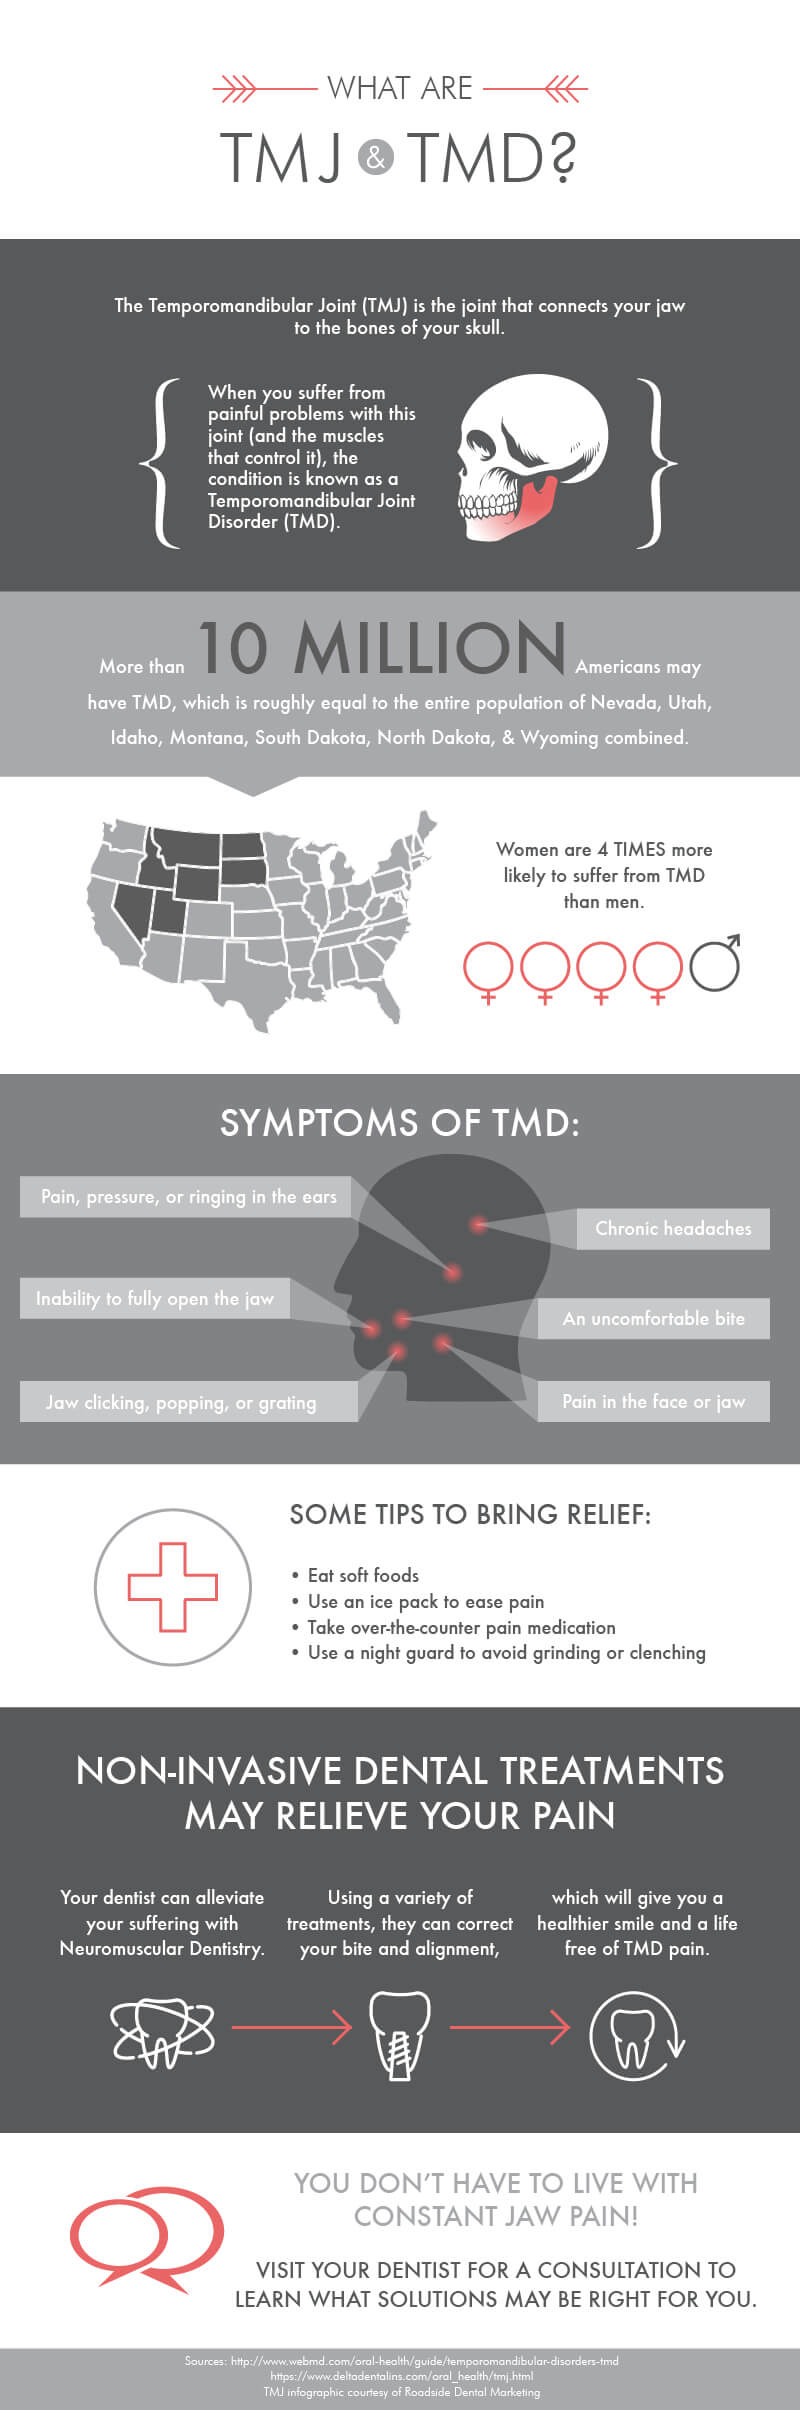 You may be able to find relief for frequent headaches and jaw pain by seeking treatment for TMD from your dentist.